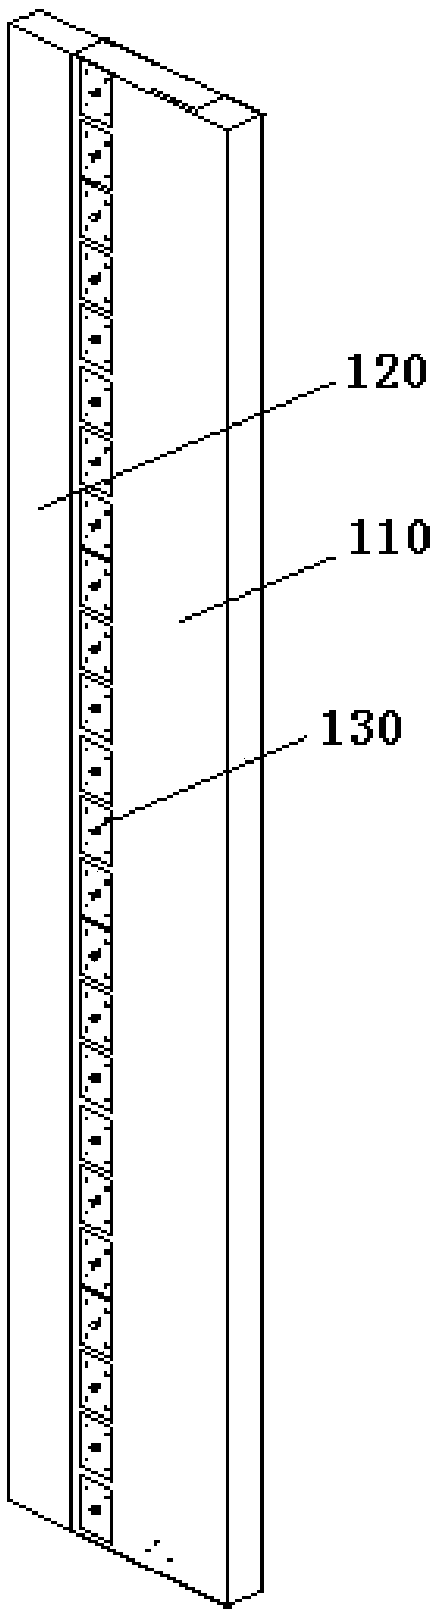 Disconnected-type plugging structure and method of wall beam on concrete-poured wall